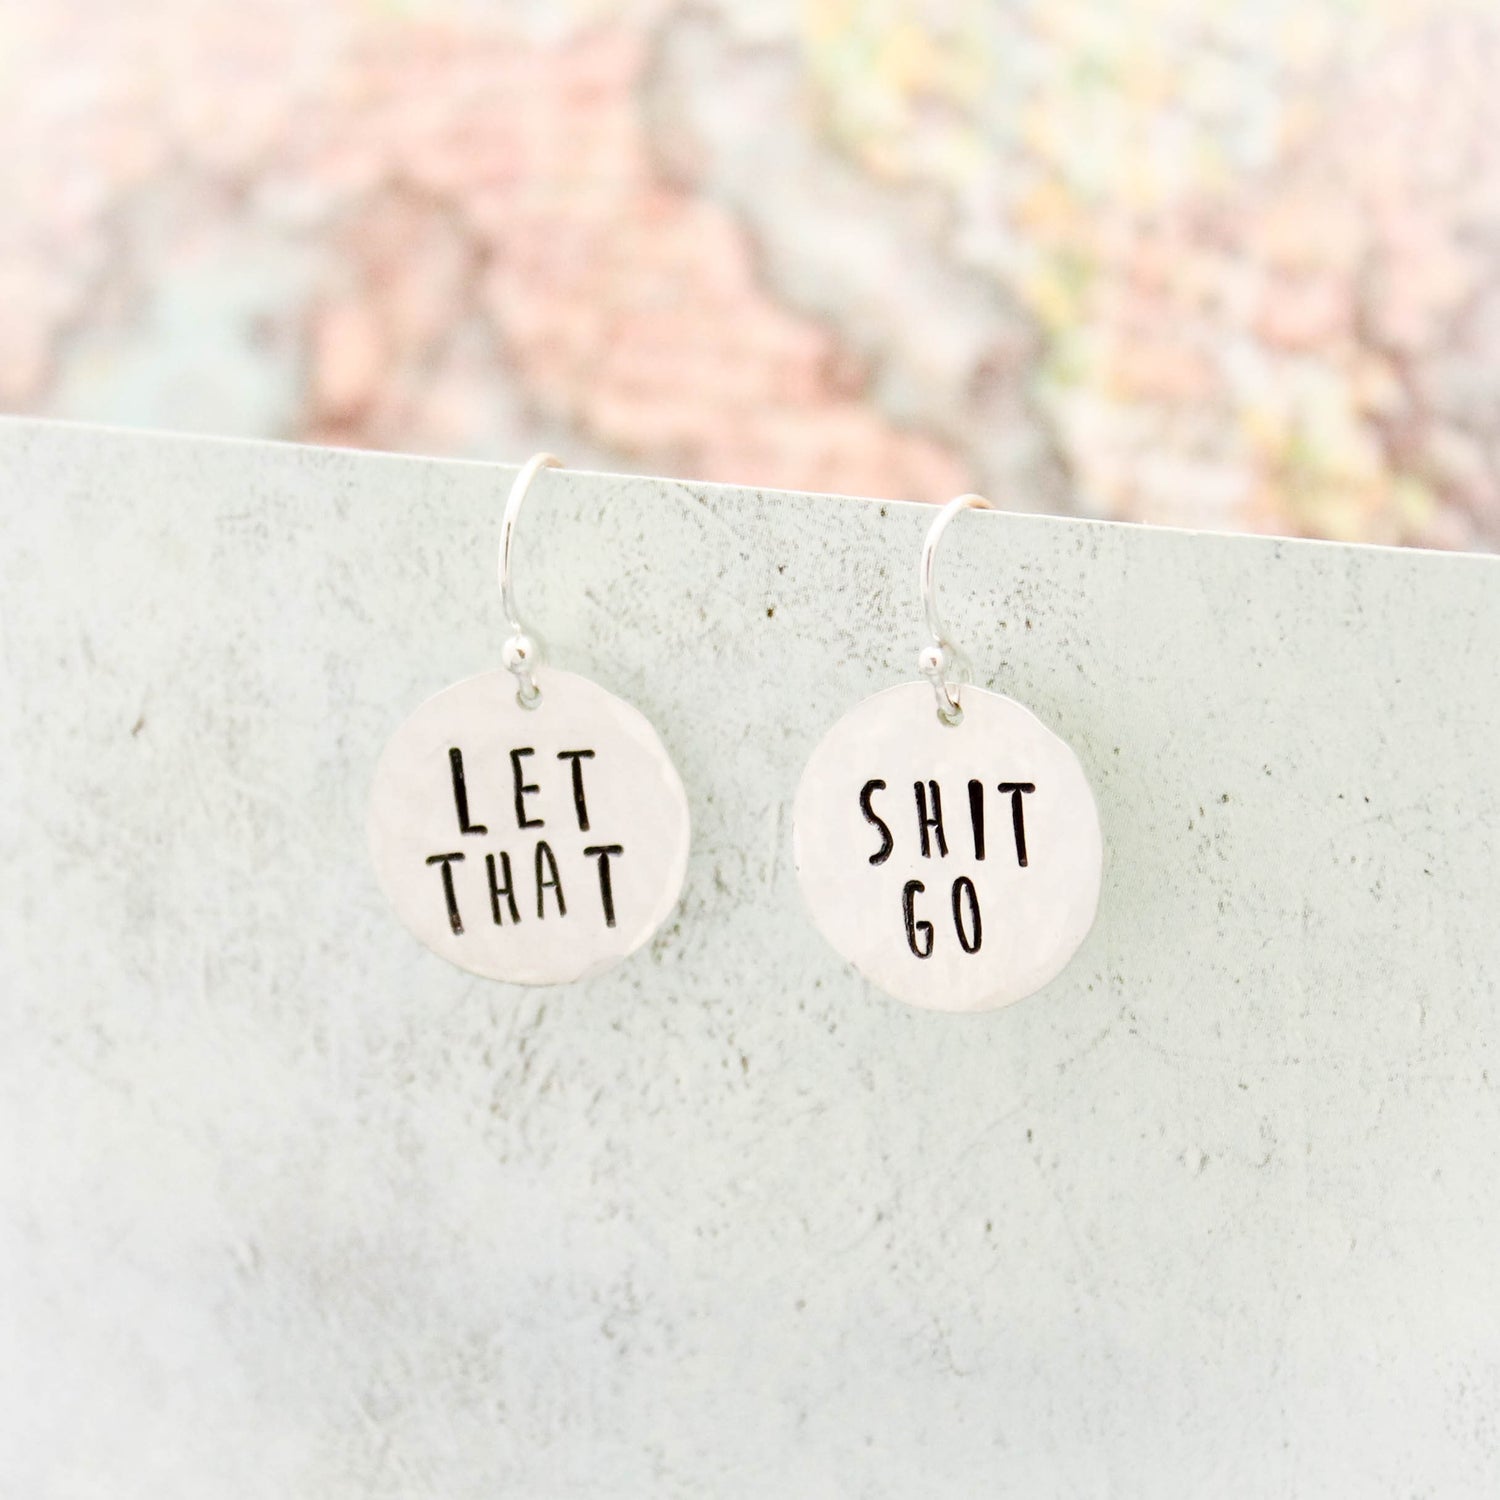 Let That Shit Go Earrings in Sterling Silver, Motivational Inspirational Jewelry, Gift for Her, Curse Word Jewelry, Let that Shit Go Gift